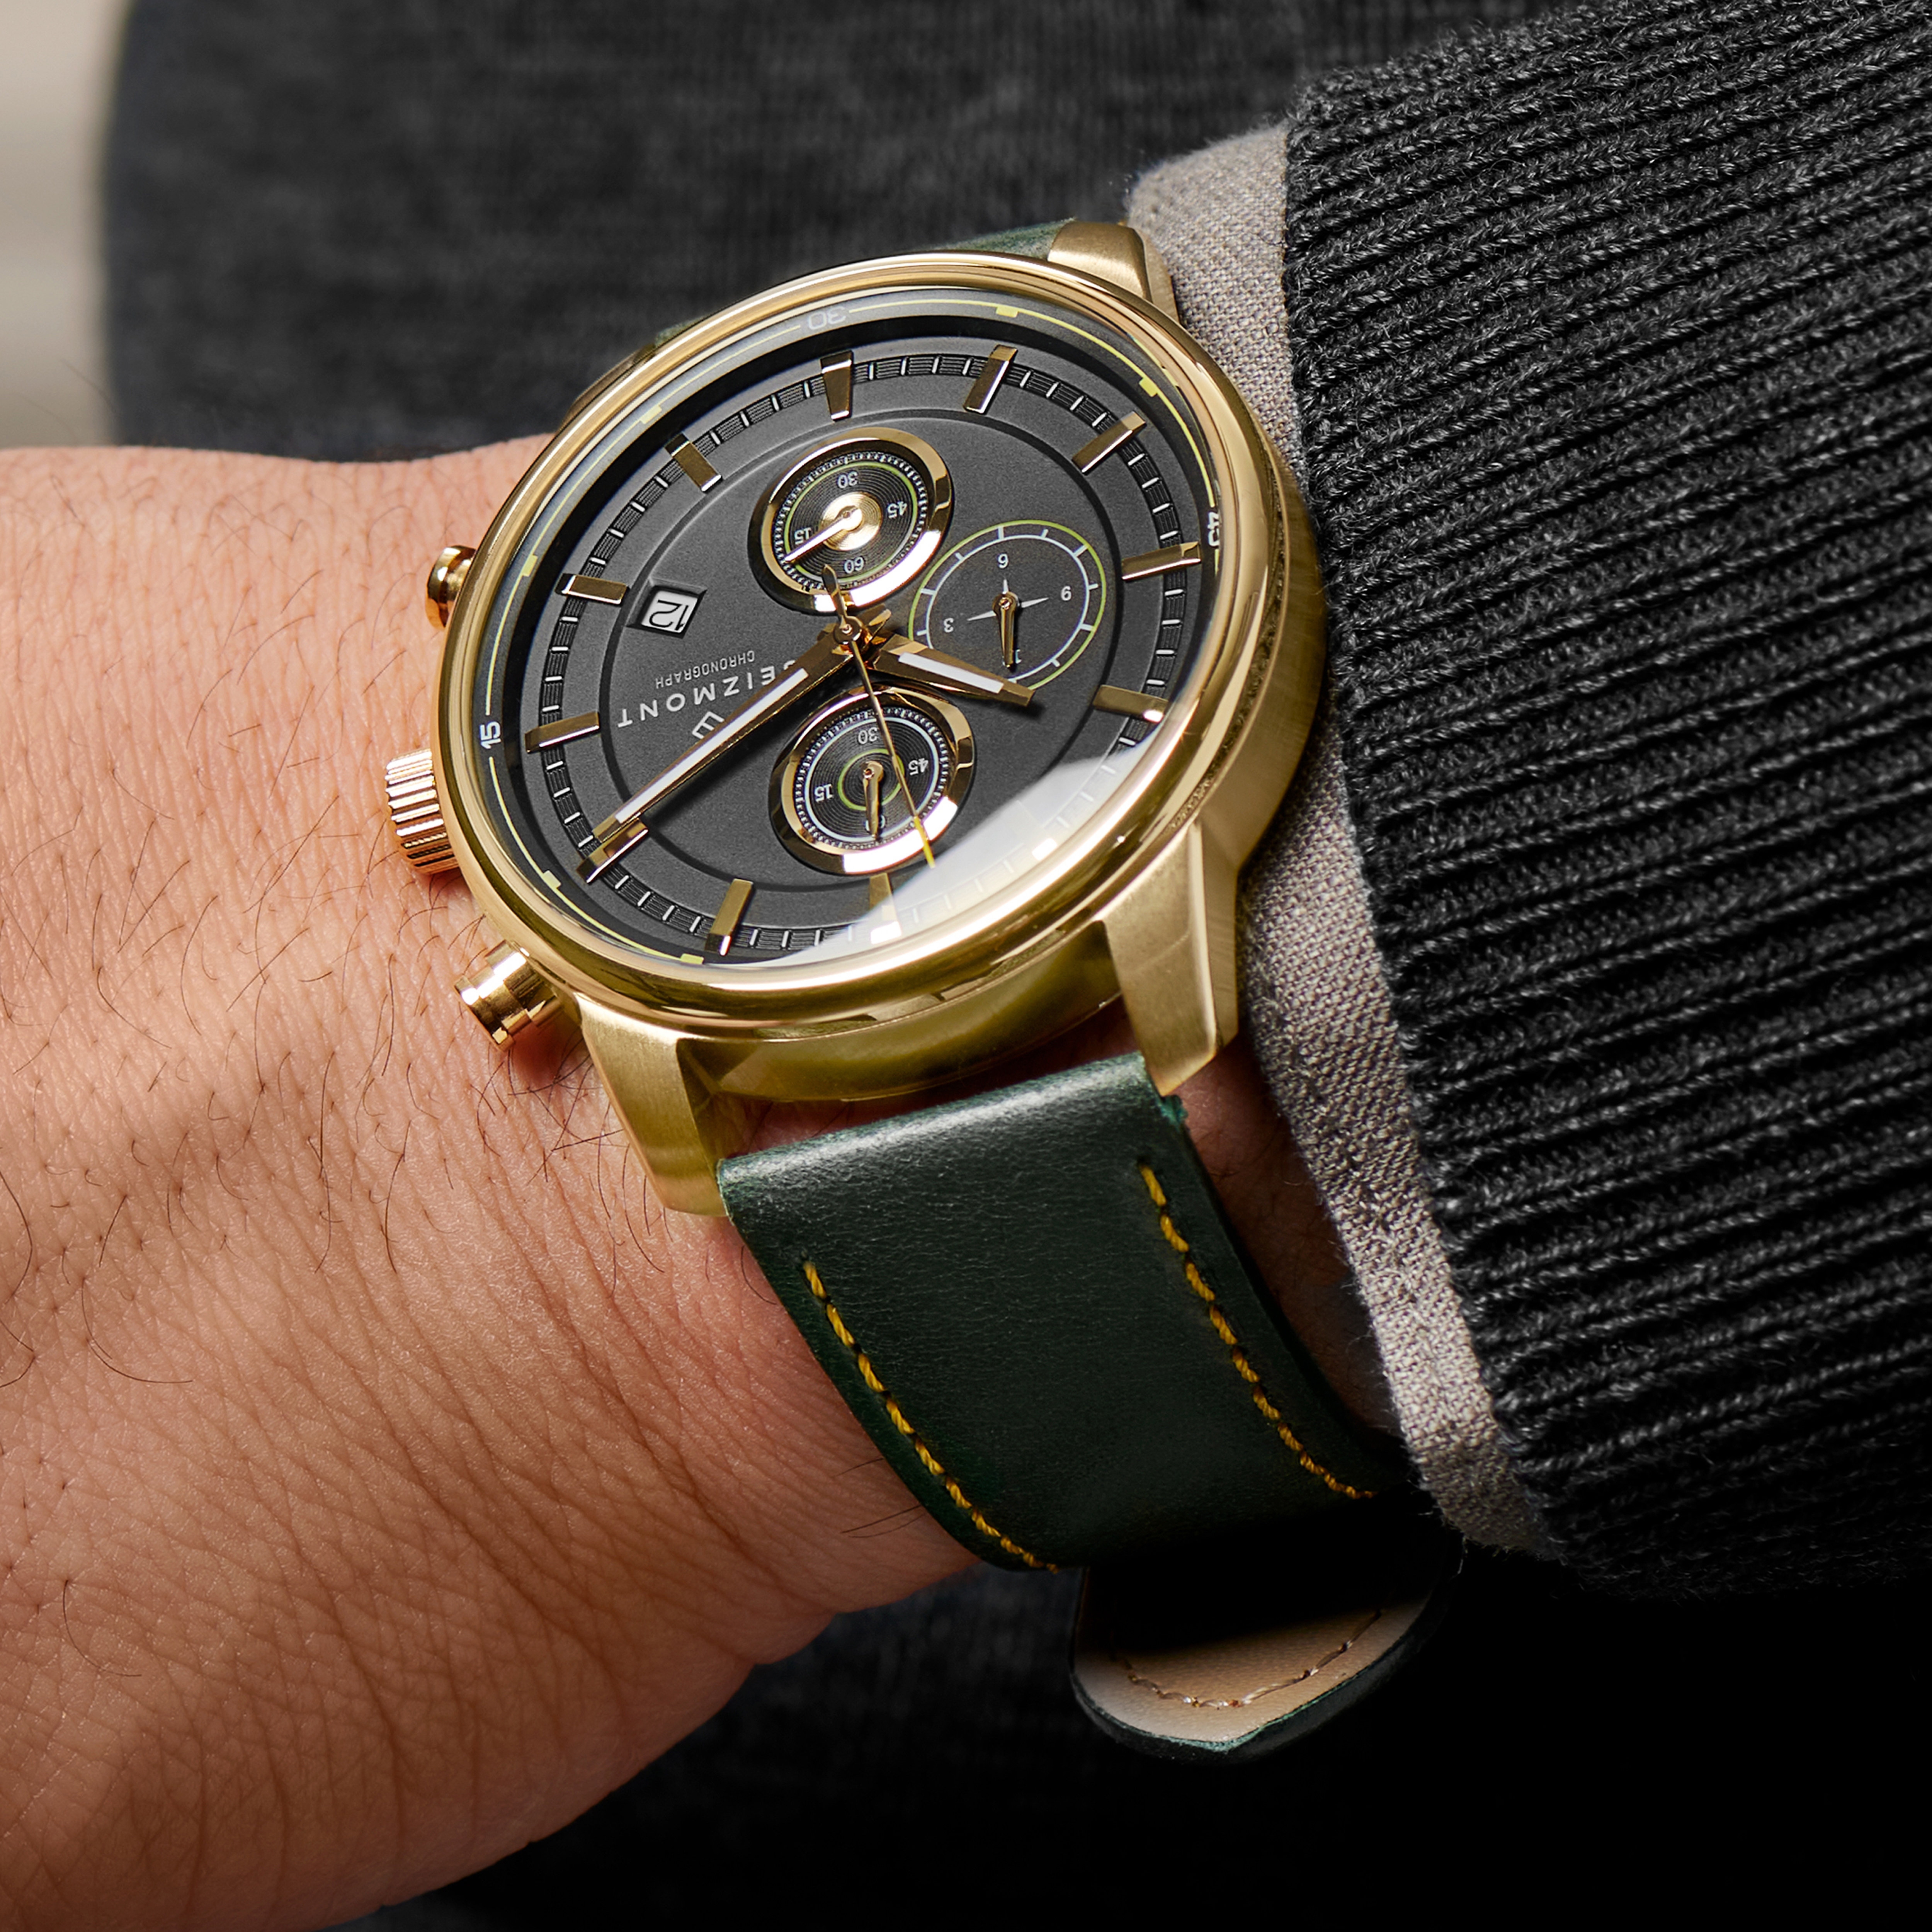 In Gold-Tone & Strap stock! Parva Watch Dial | | Green Black Leather Seizmont With Chronograph |